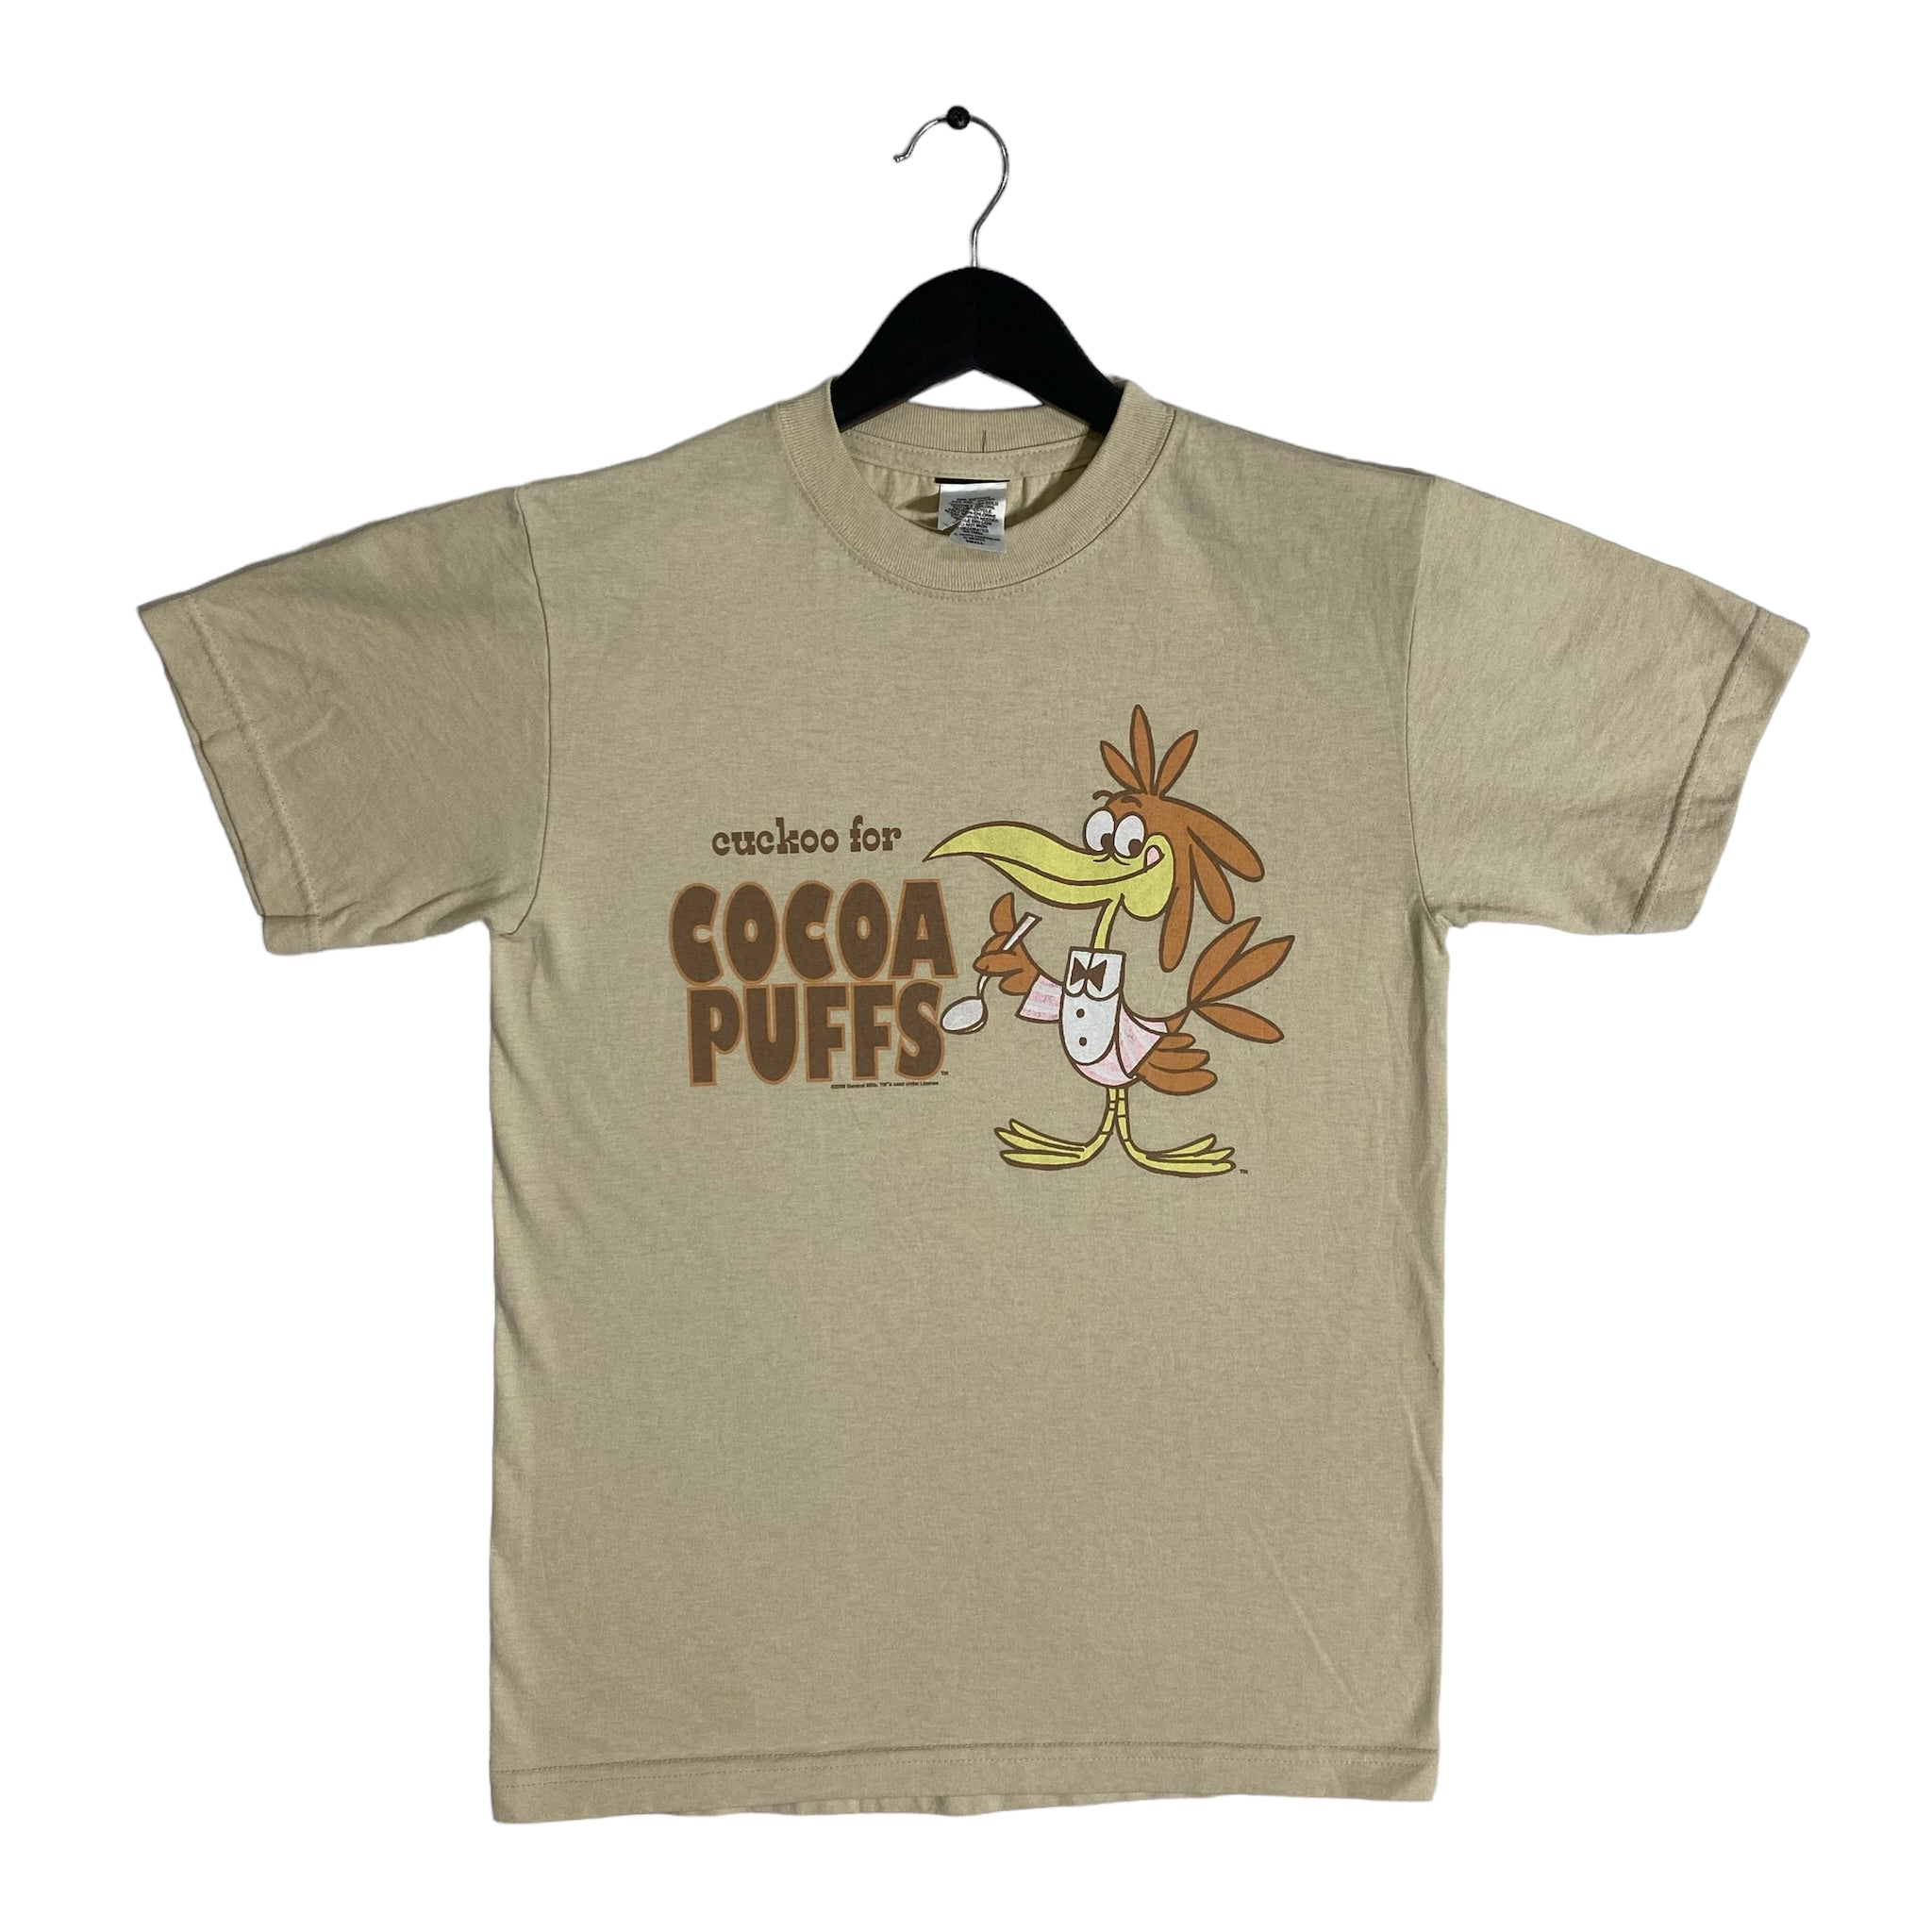 Vintage Cocoa Puffs Tee